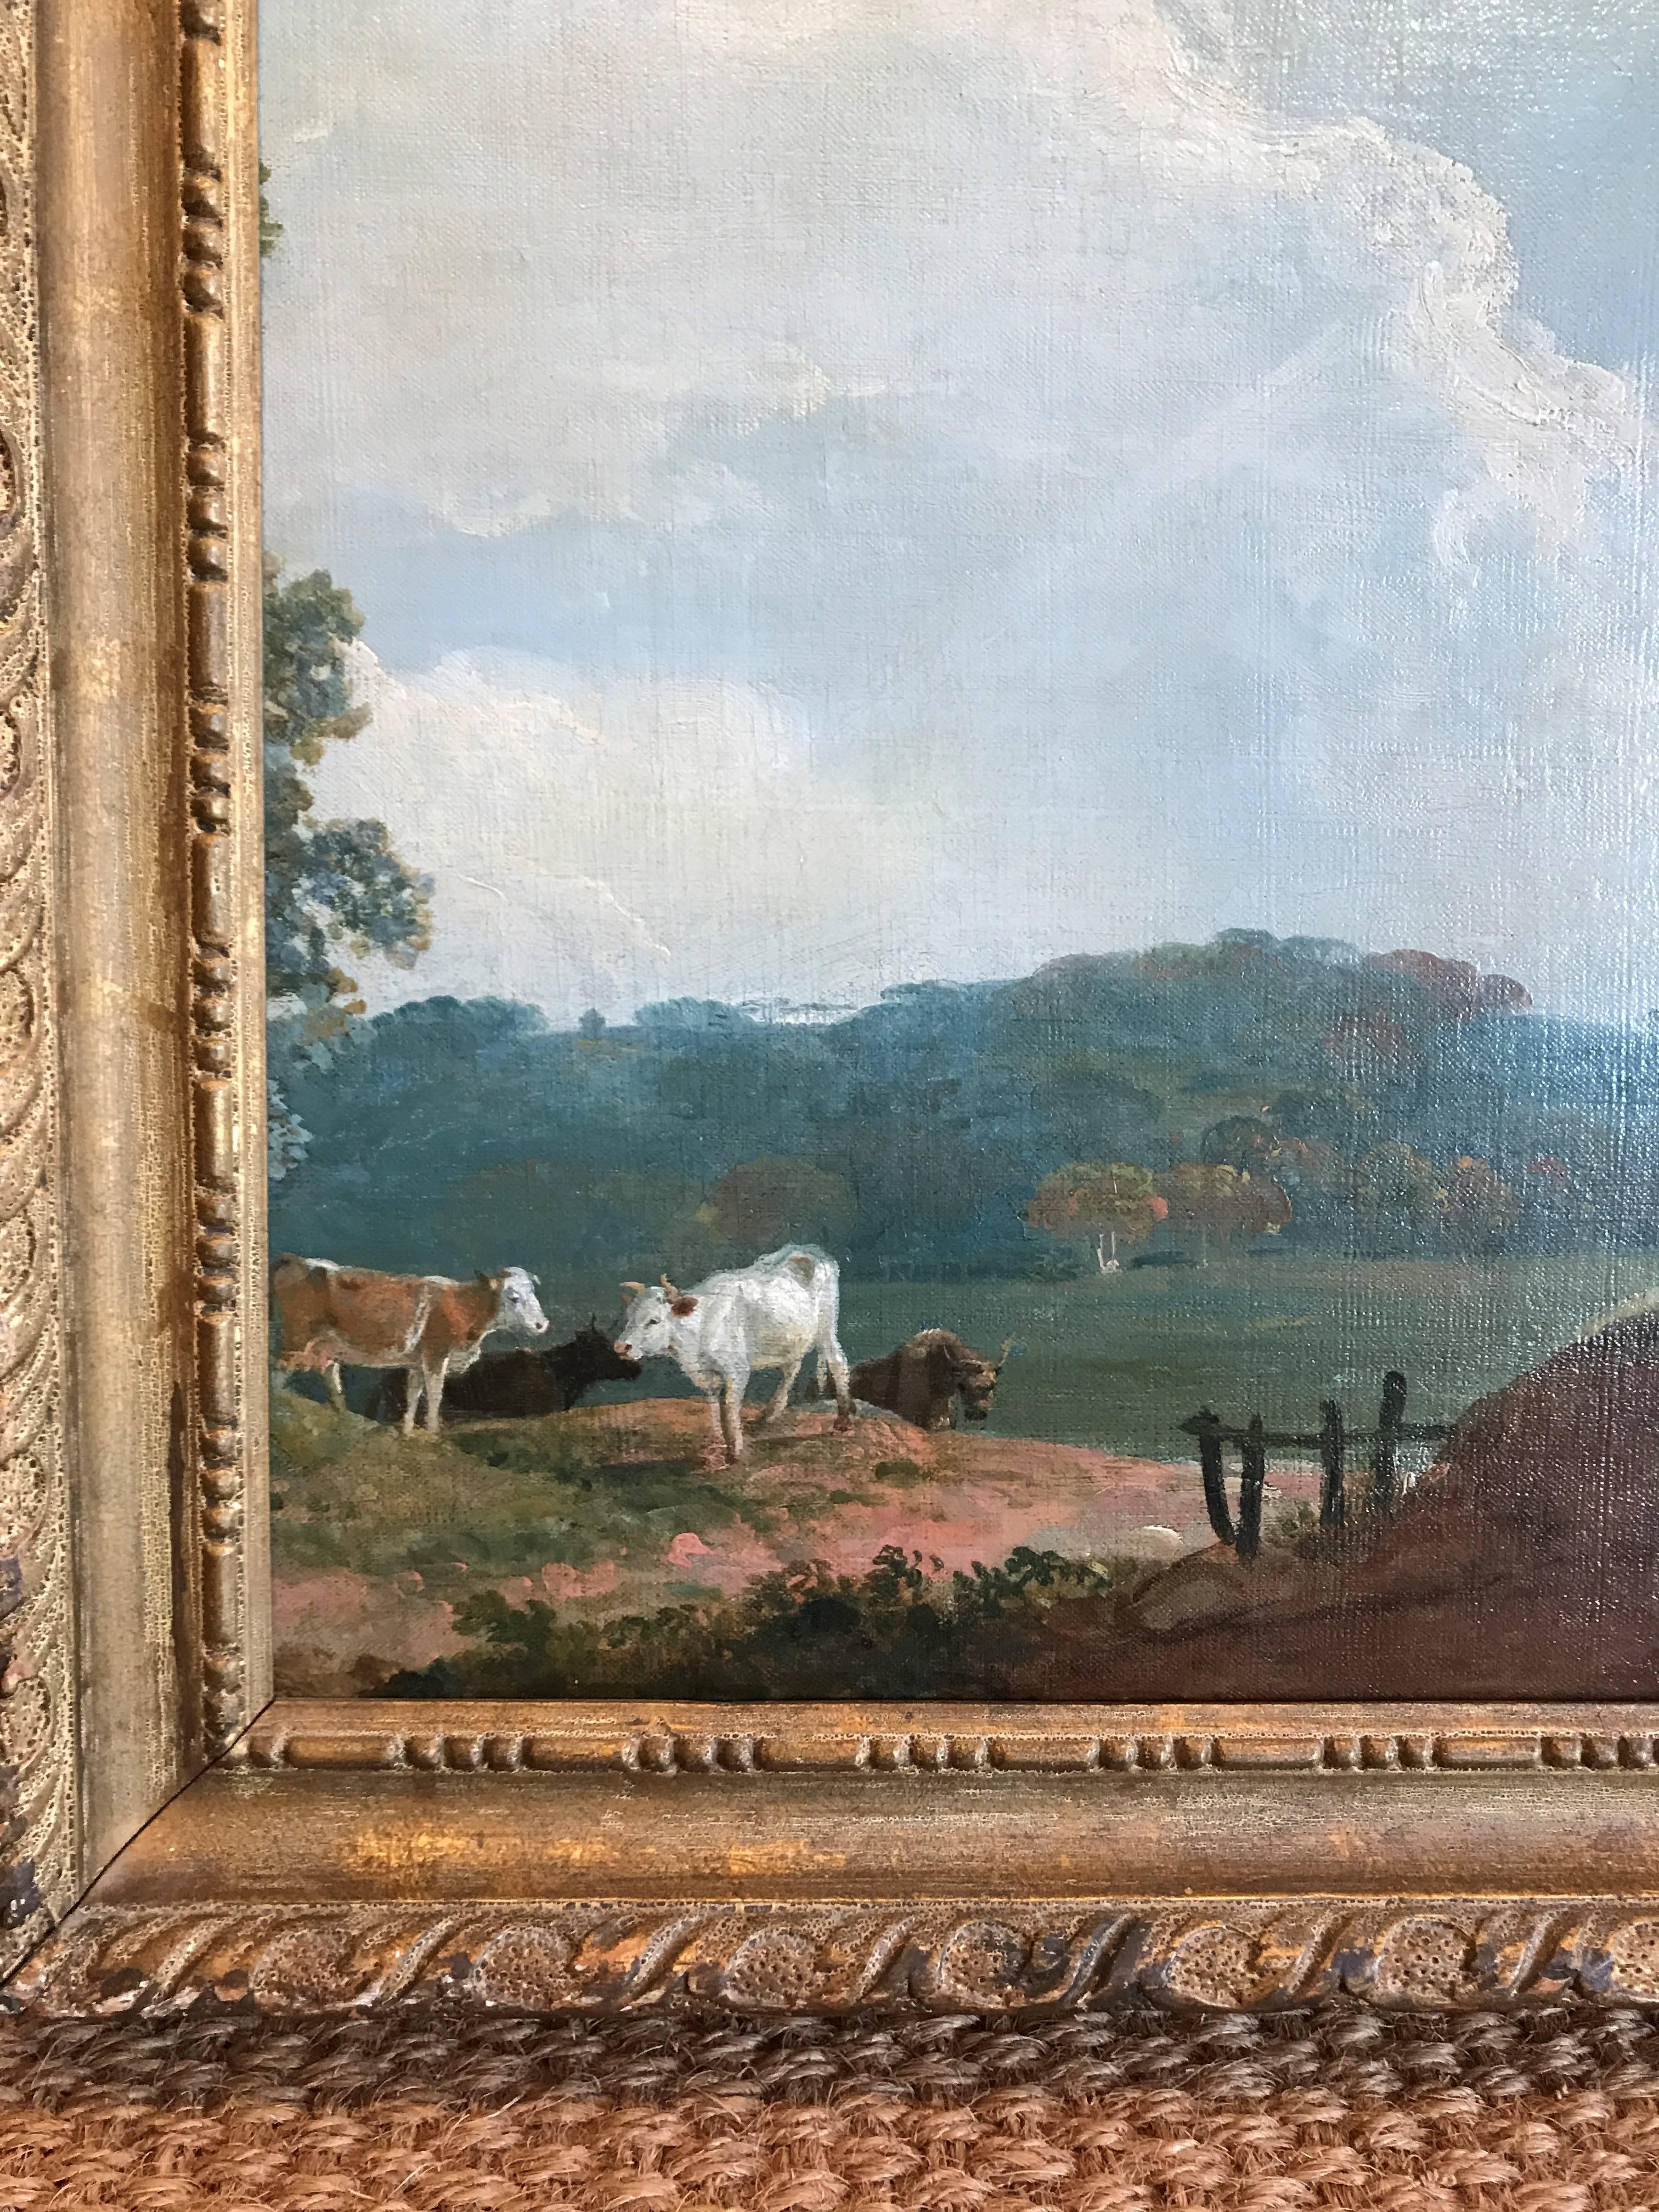 Landscape with Horses and Catlle - Gray Animal Painting by Sawrey Gilpin